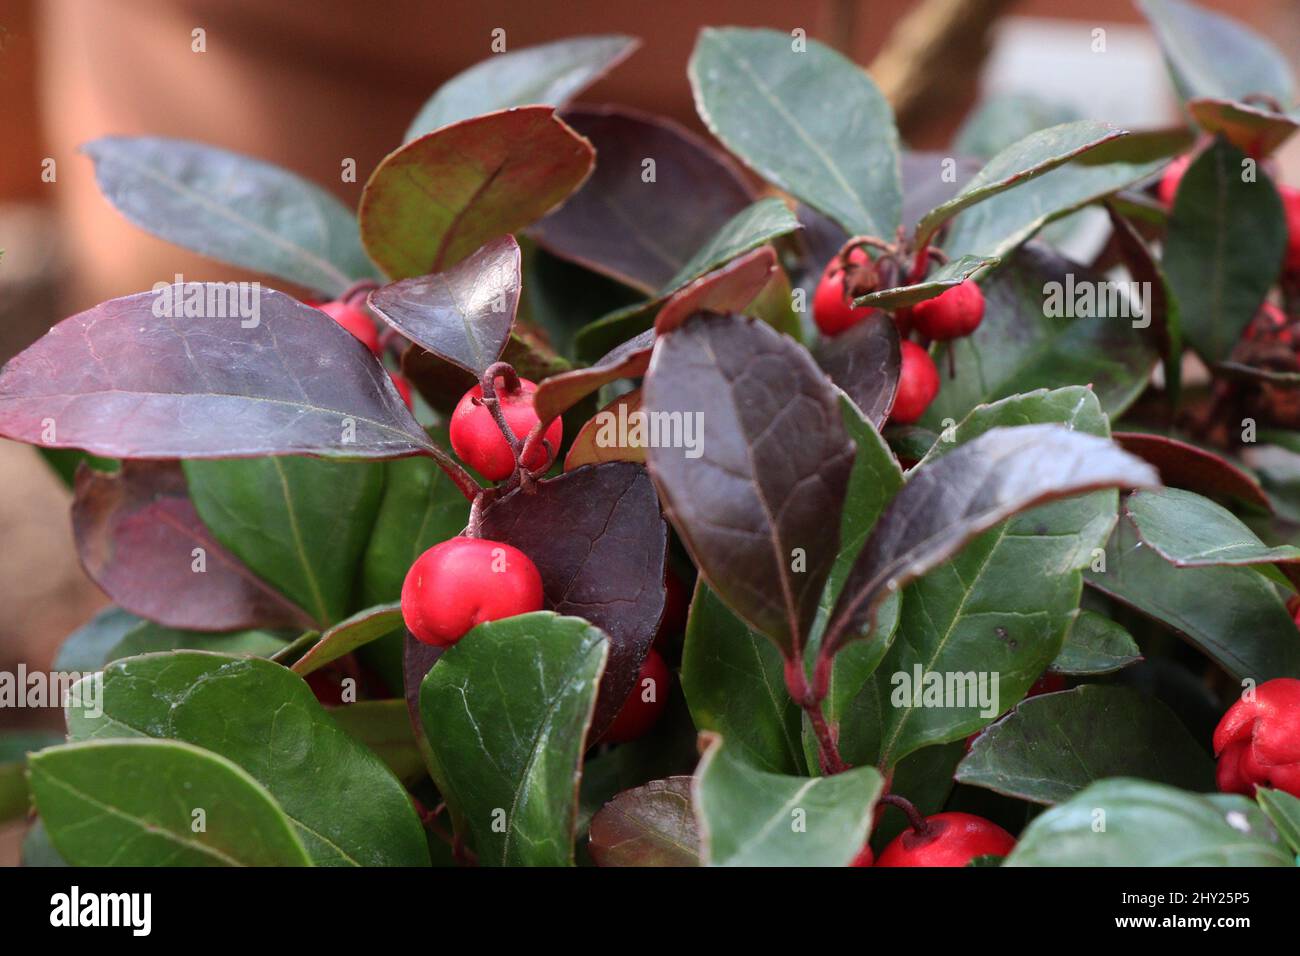 Plant gaultheria procumbens or eastern teaberry Stock Photo